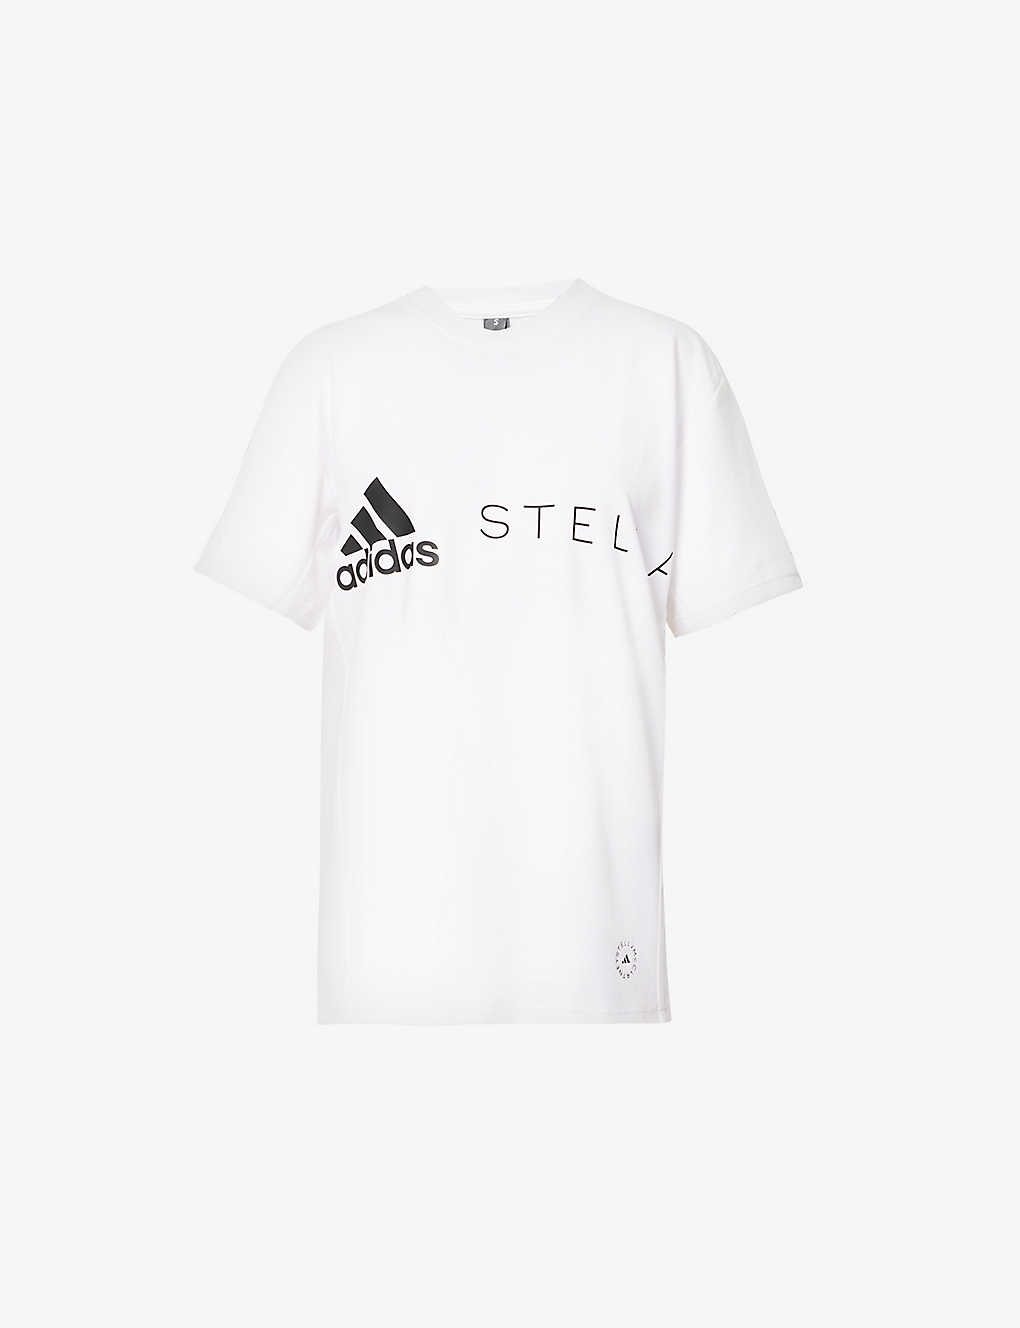 ADIDAS BY STELLA MCCARTNEY ADIDAS BY STELLA MCCARTNEY WOMEN'S WHITE LOGO-PRINT RELAXED-FIT ORGANIC COTTON AND RECYCLED POLYESTE,63941990